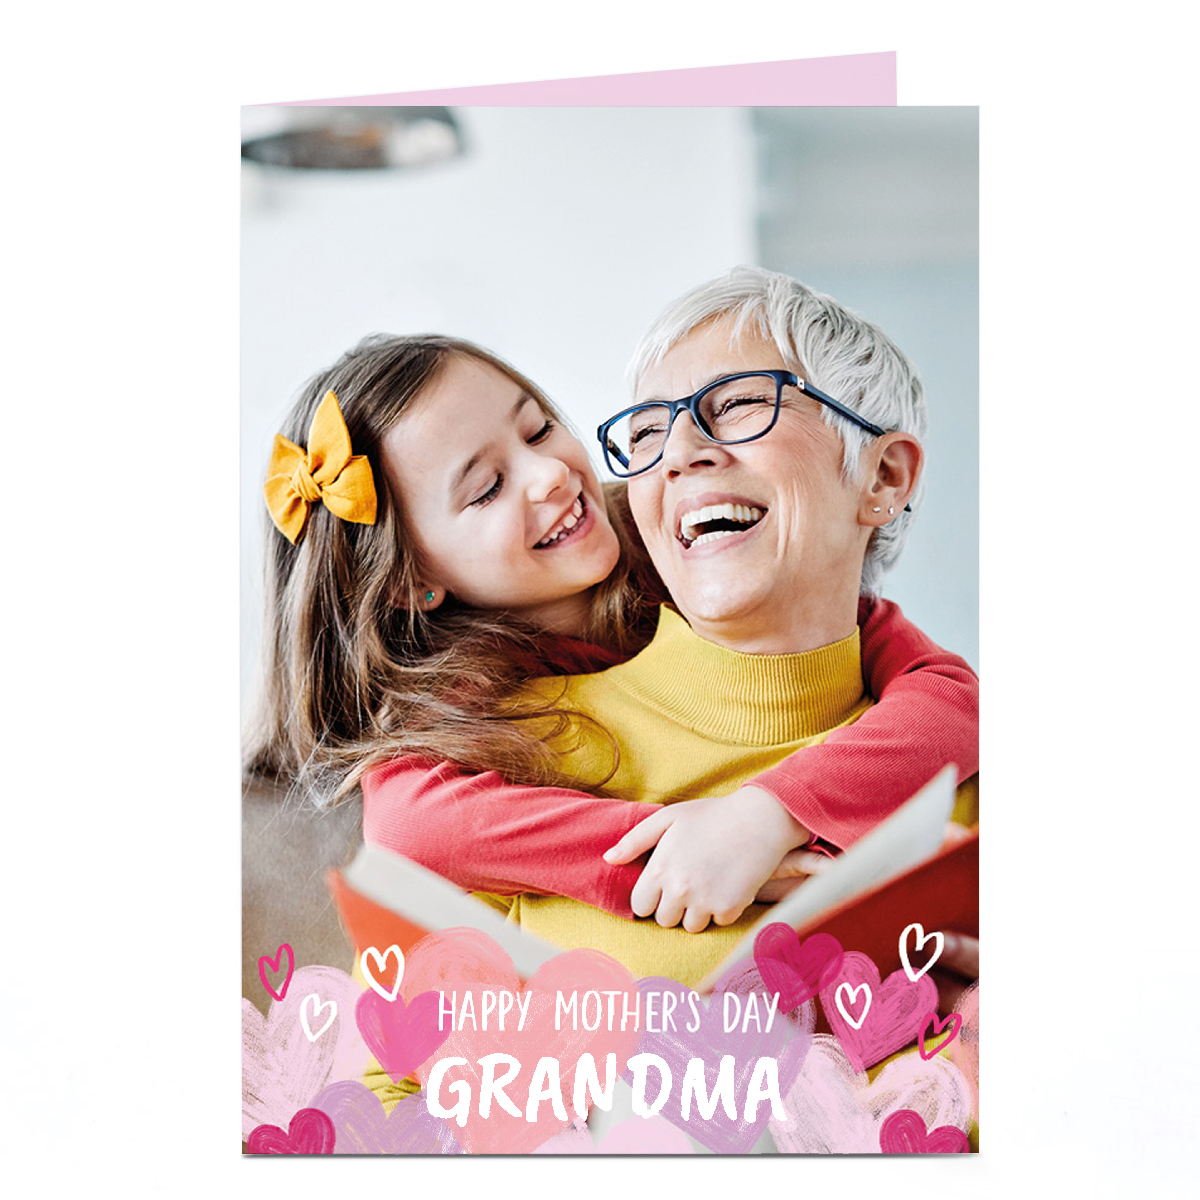 Personalised Mother's Day Card - IMAGE BG with Hearts